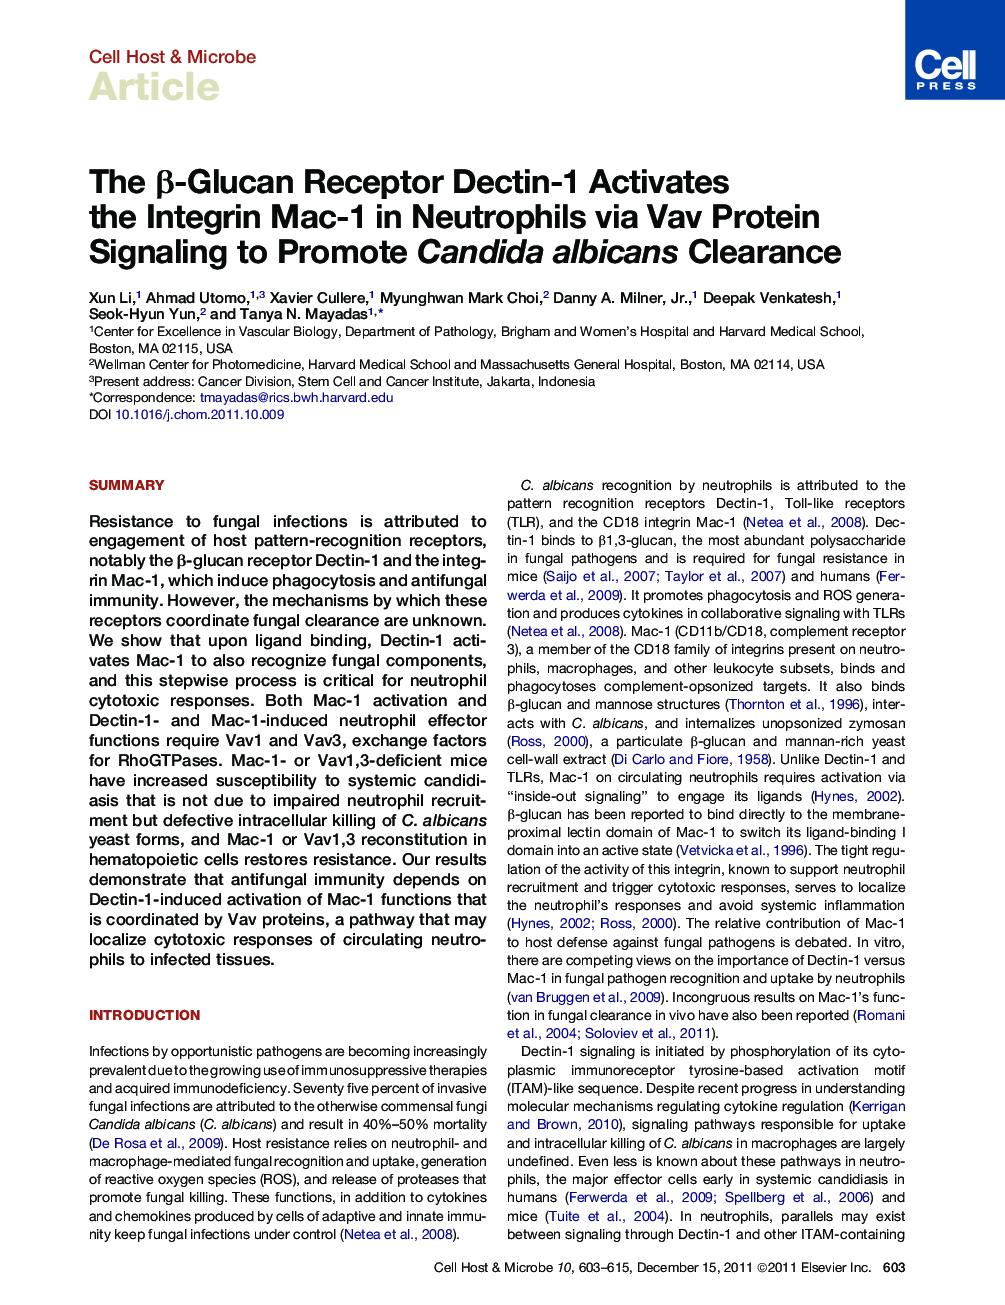 The β-Glucan Receptor Dectin-1 Activates the Integrin Mac-1 in Neutrophils via Vav Protein Signaling to Promote Candida albicans Clearance